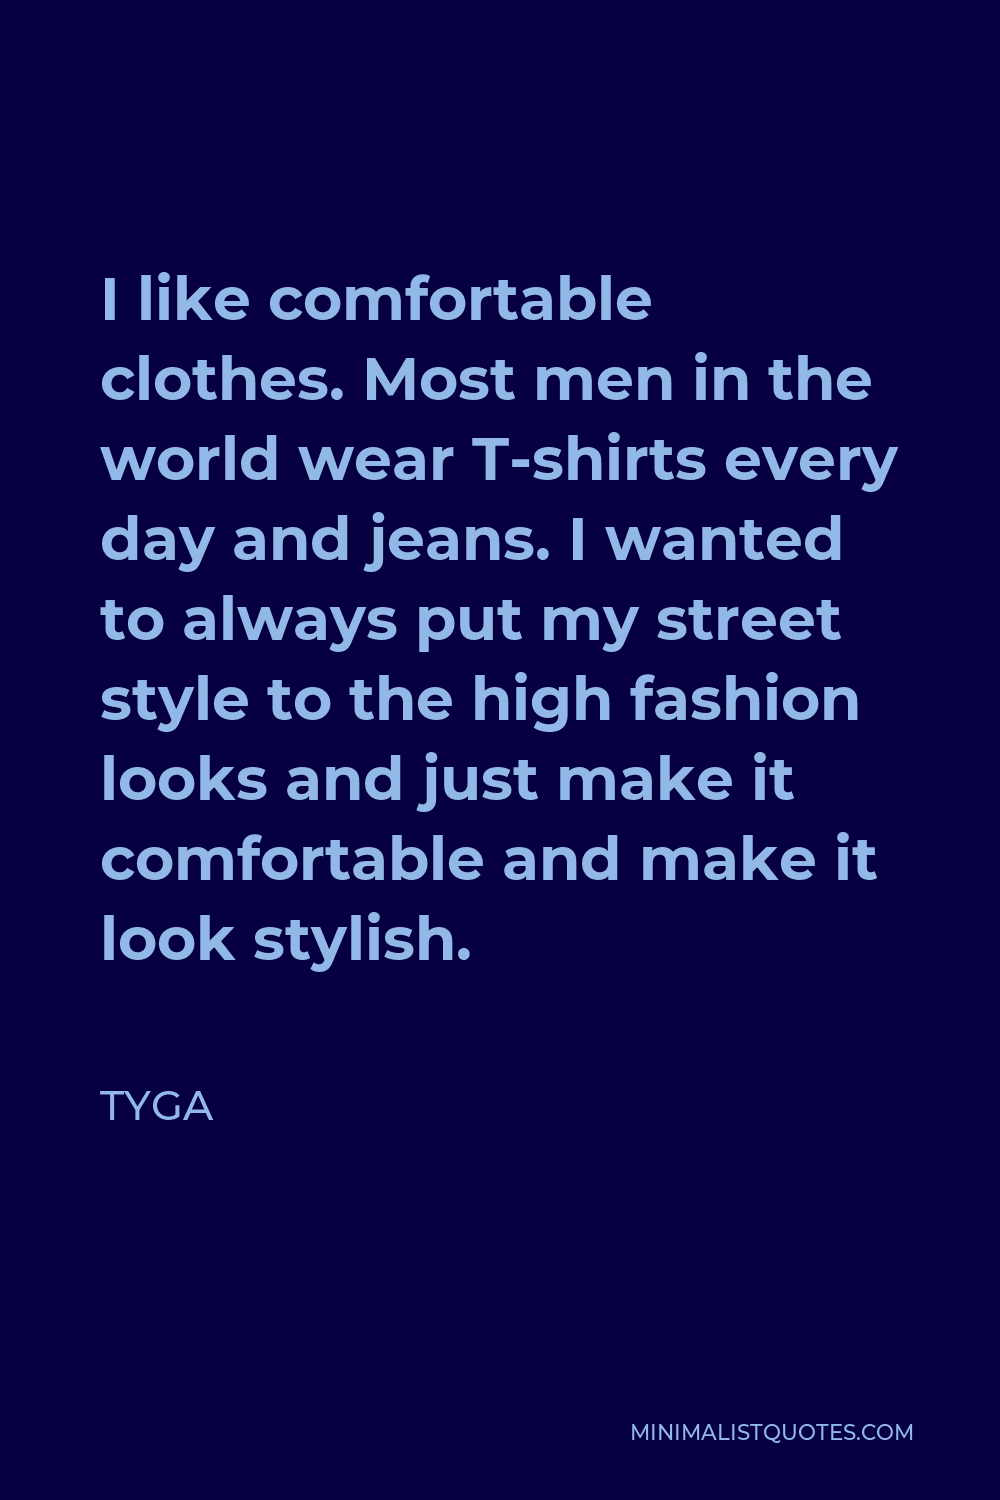 Tyga Quote - I like comfortable clothes. Most men in the world wear T-shirts every day and jeans. I wanted to always put my street style to the high fashion looks and just make it comfortable and make it look stylish.